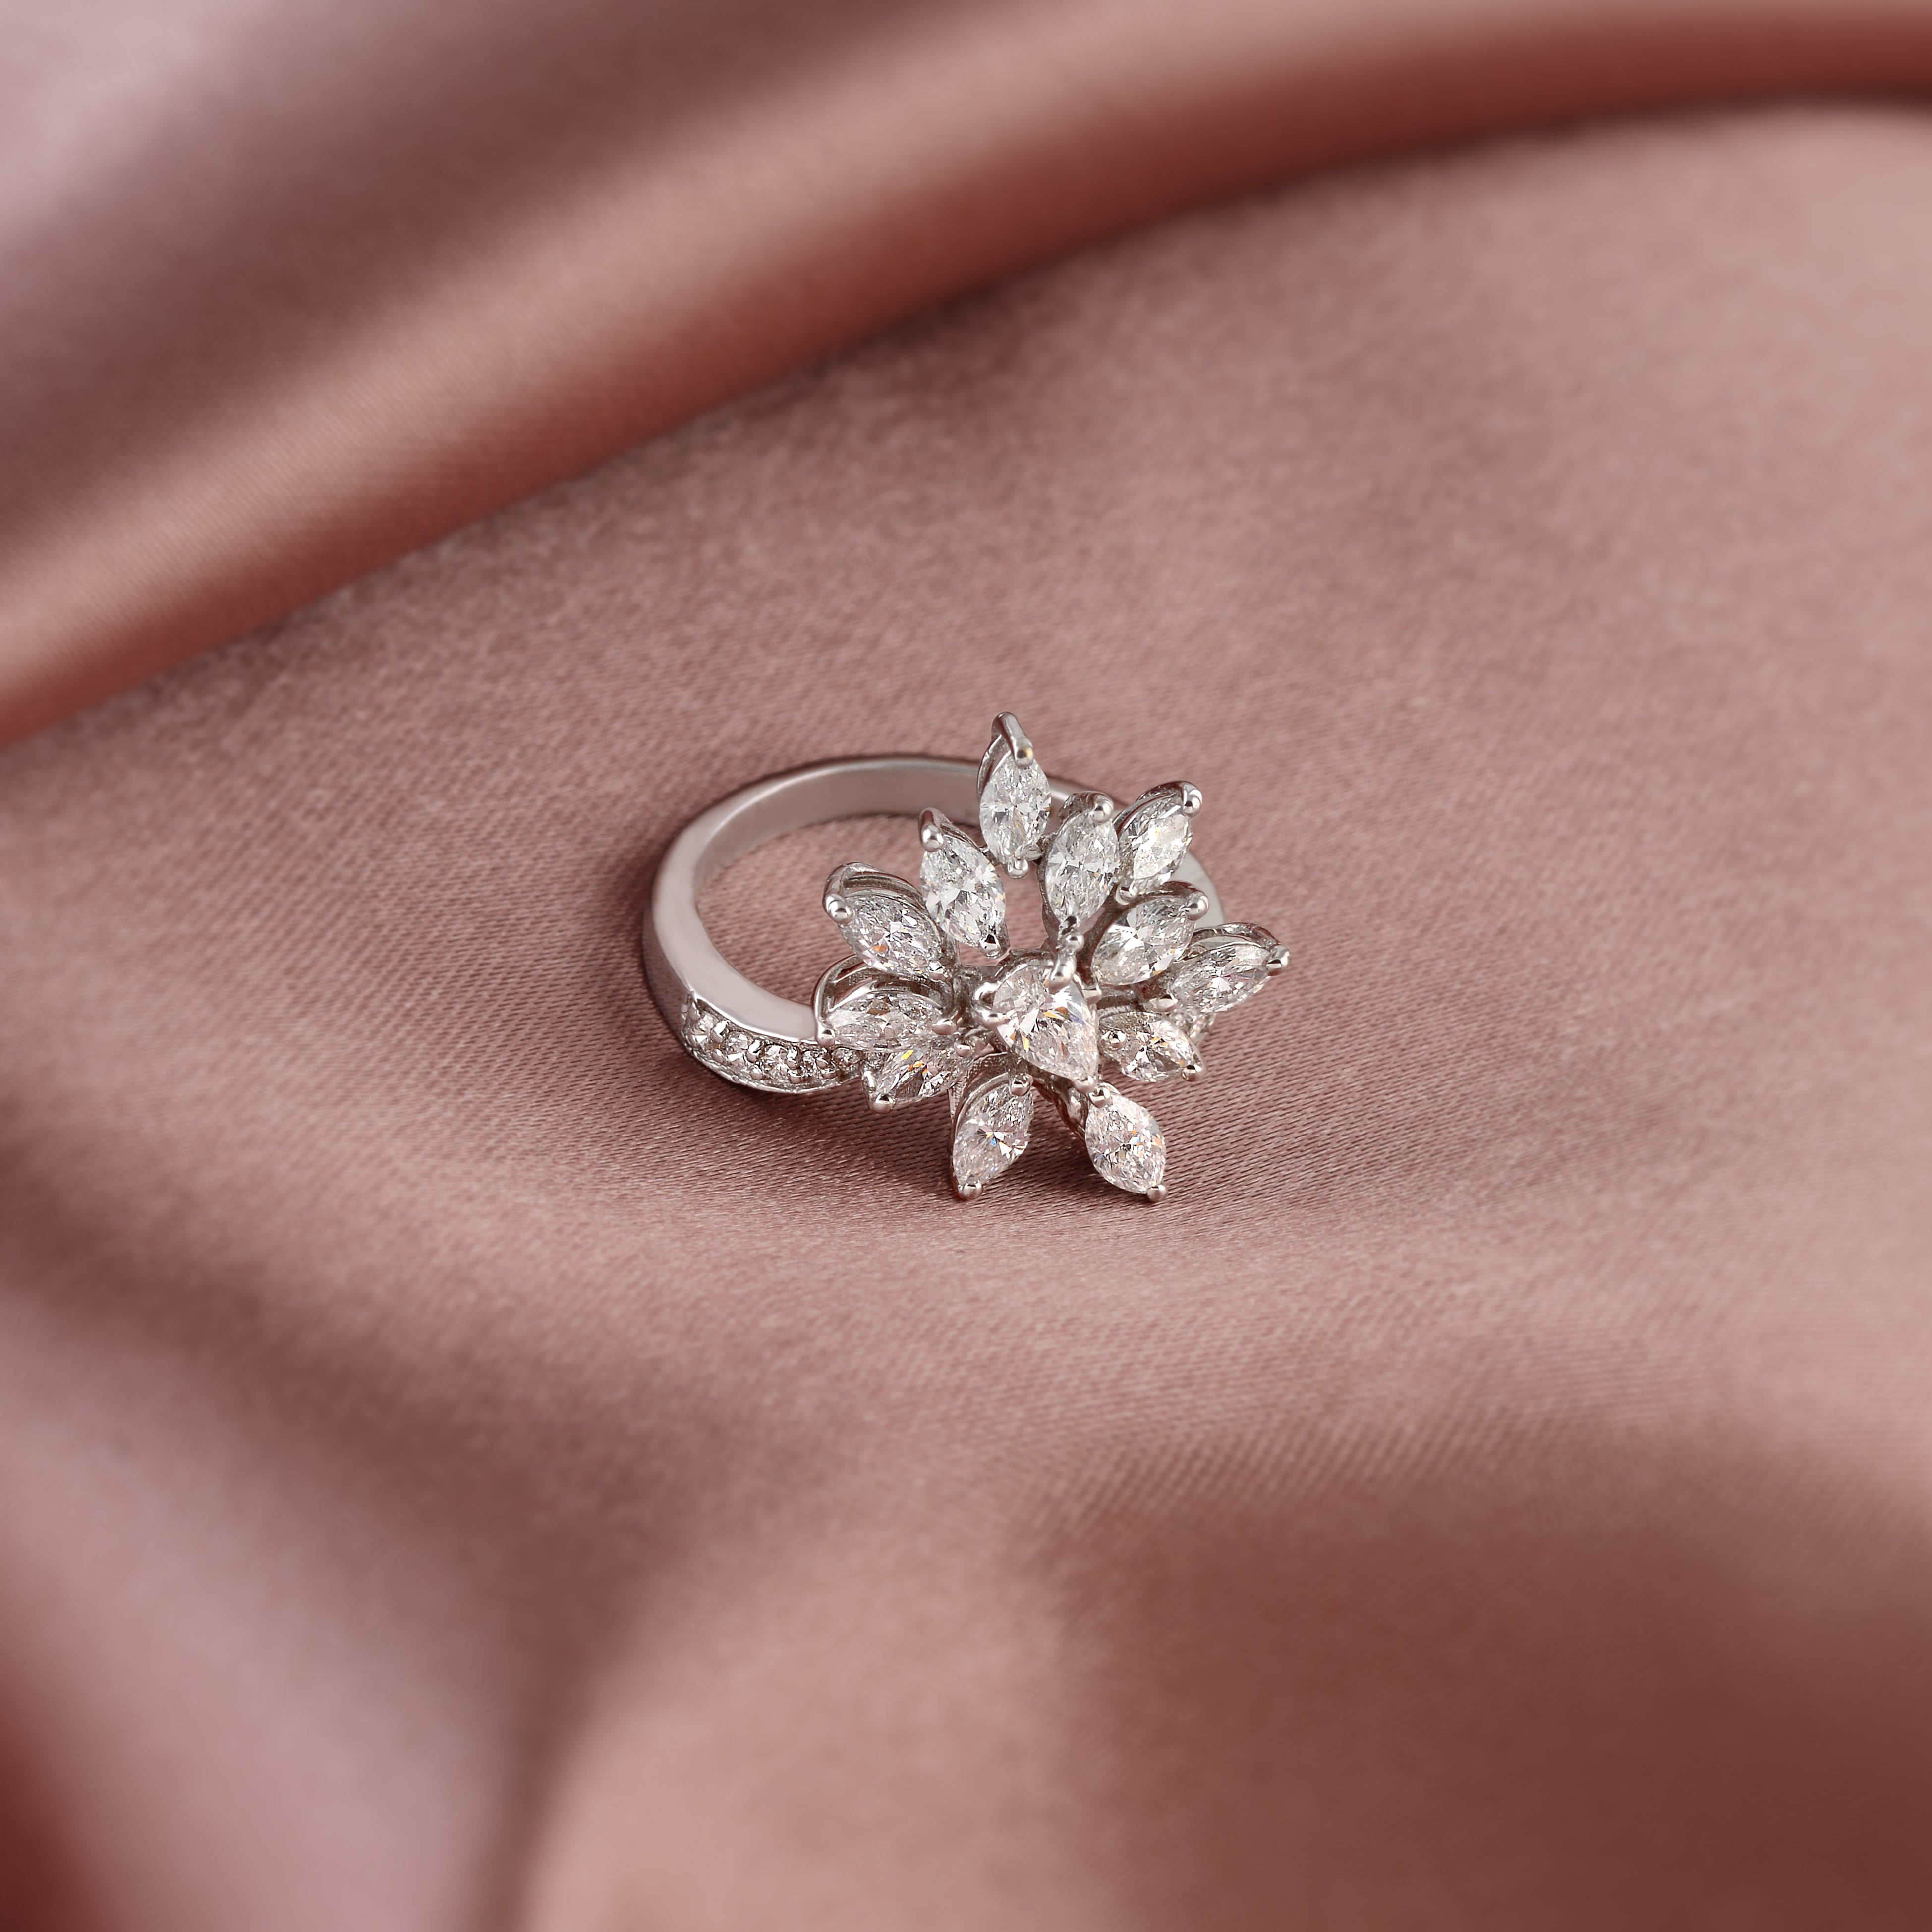 Floral Cluster Diamond Ring